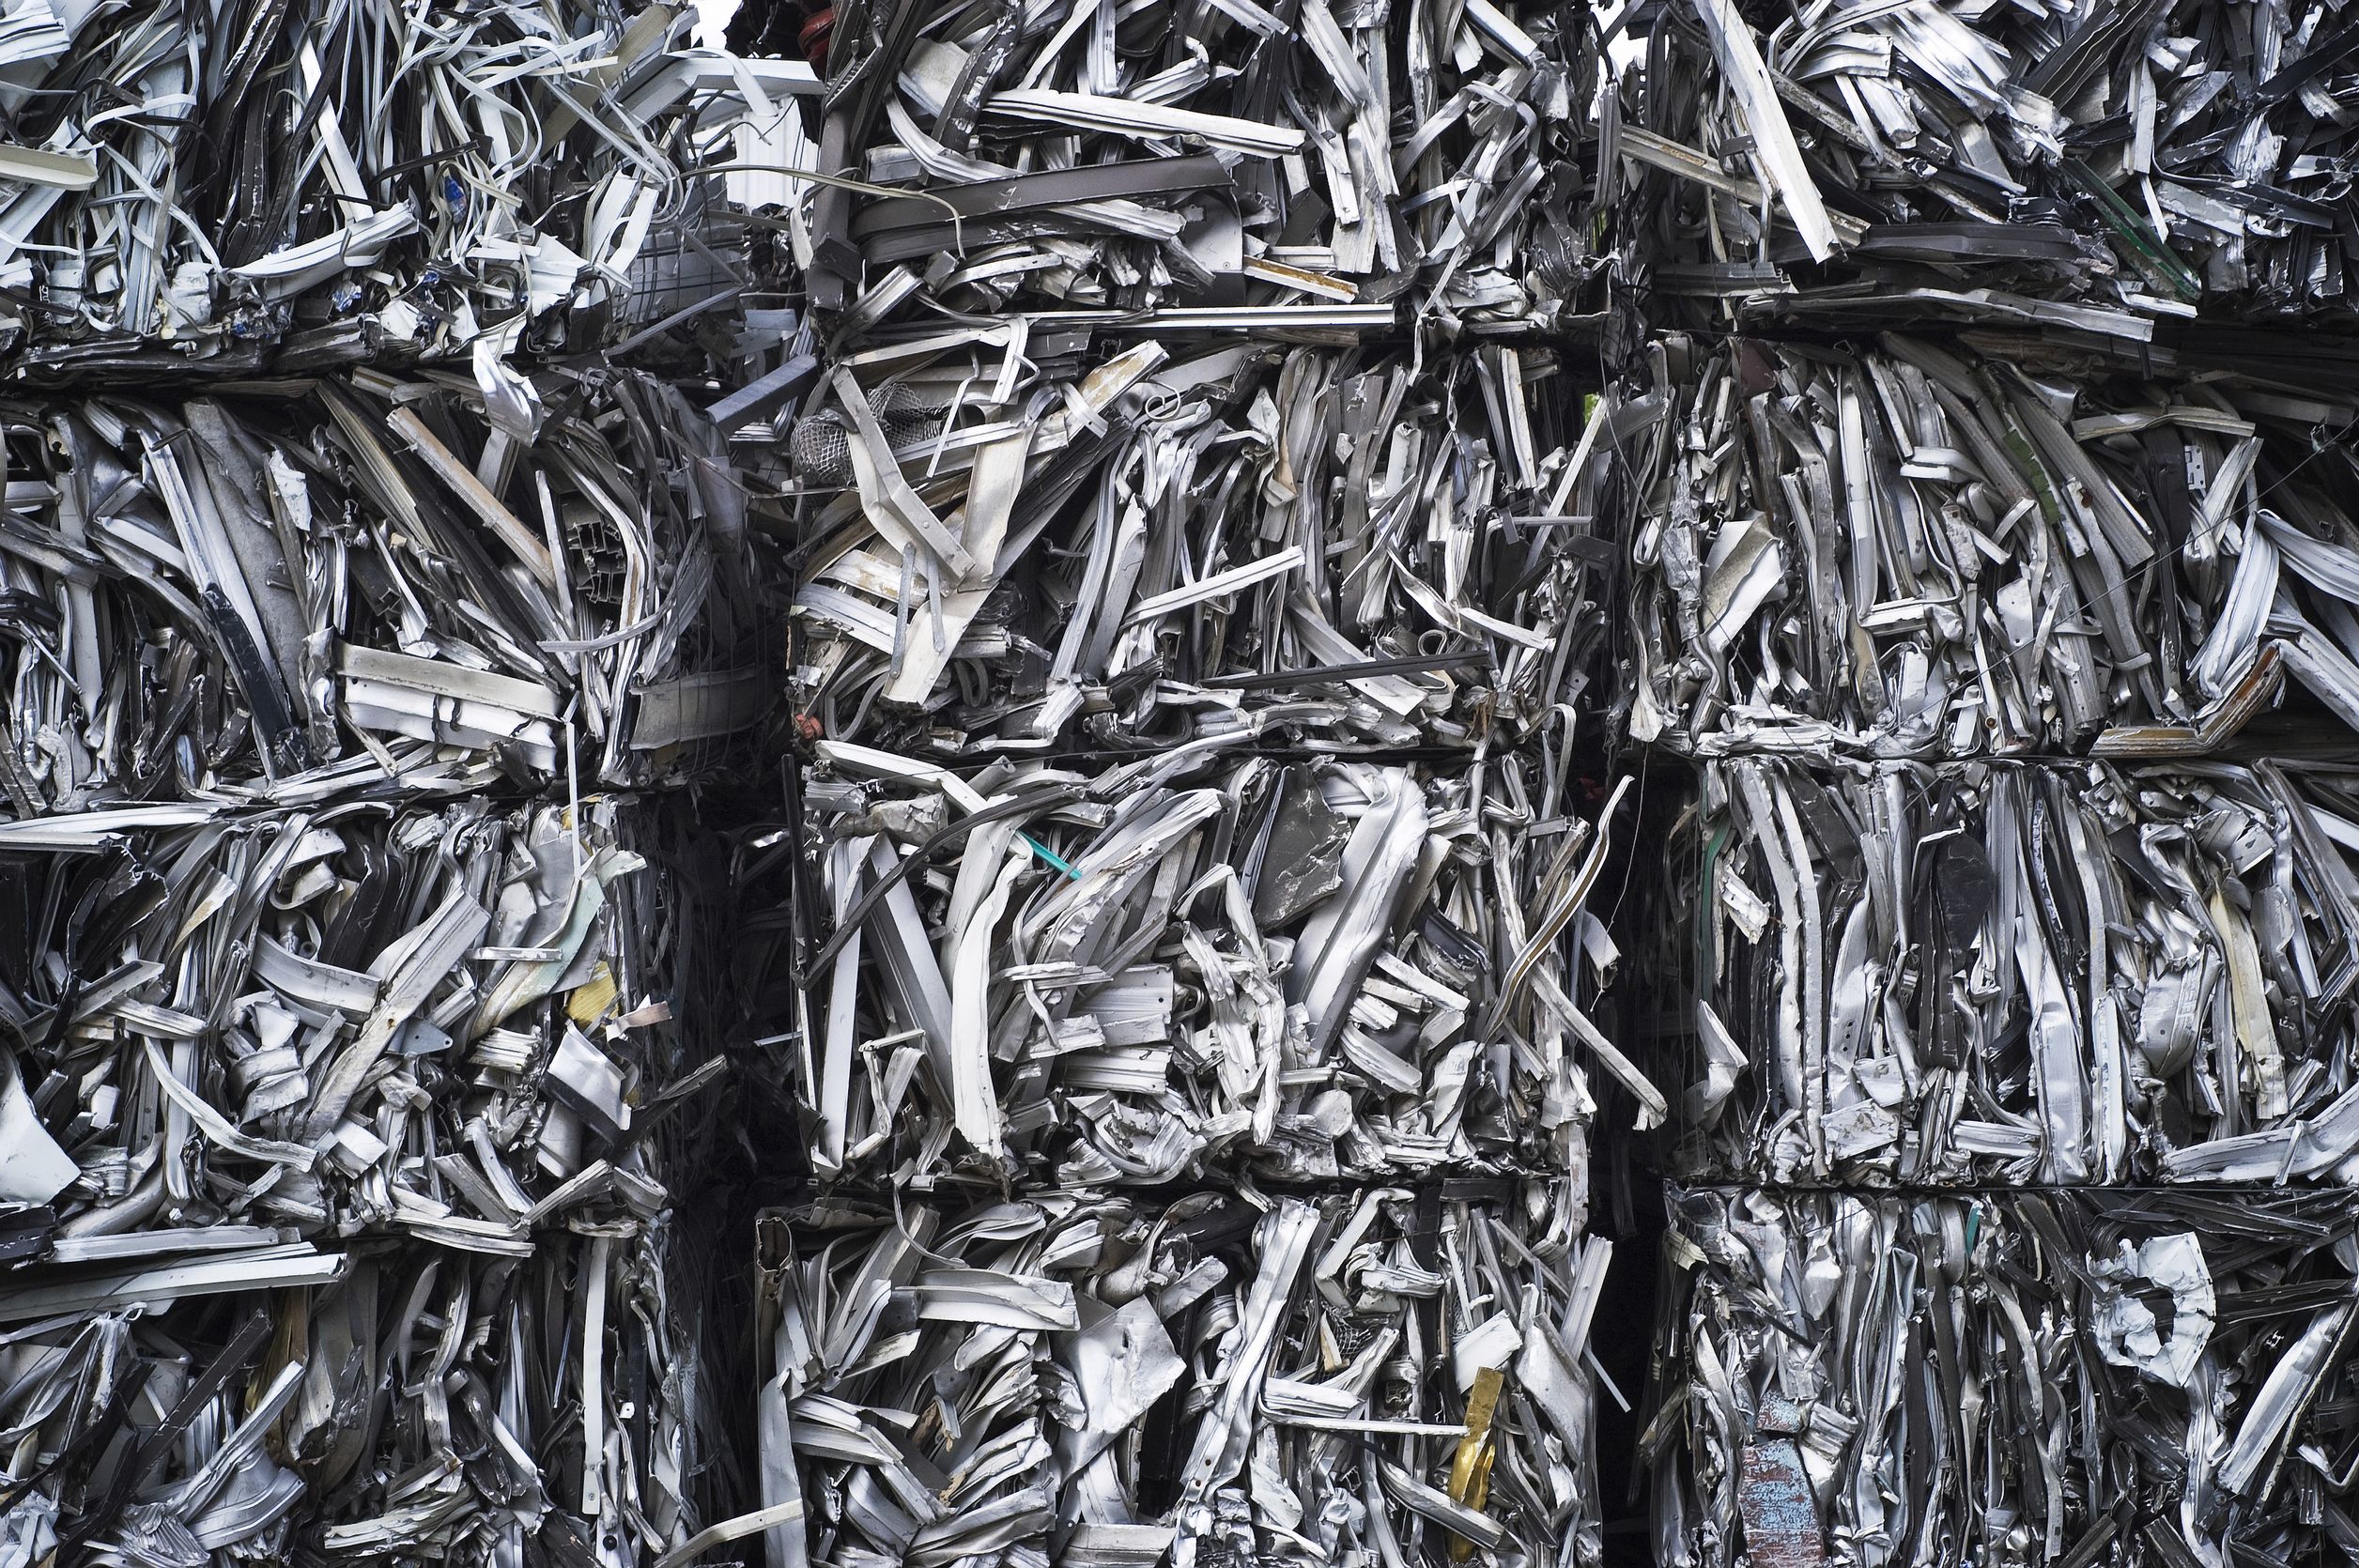 Reasons to Recycle on Metal at the Stainless Metal Recycling Companies in Baltimore, MD